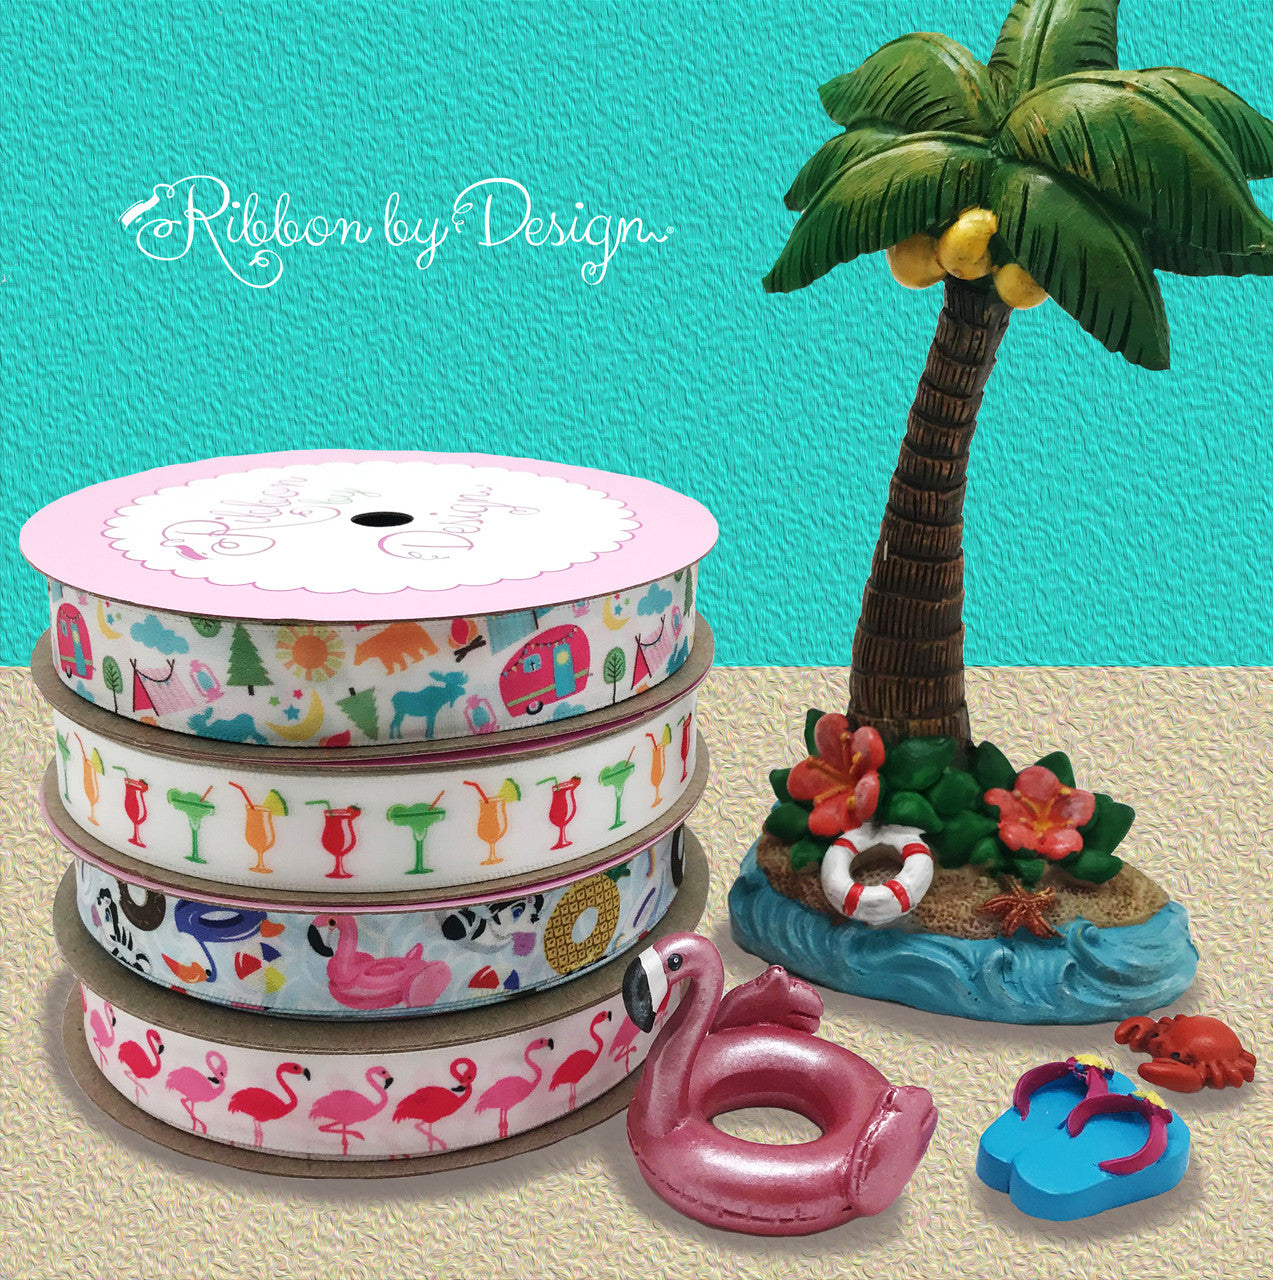 Mix our pool float ribbon with flamingos, summer drinks, flamingos and glamping ribbonfor a complete Summer party theme!